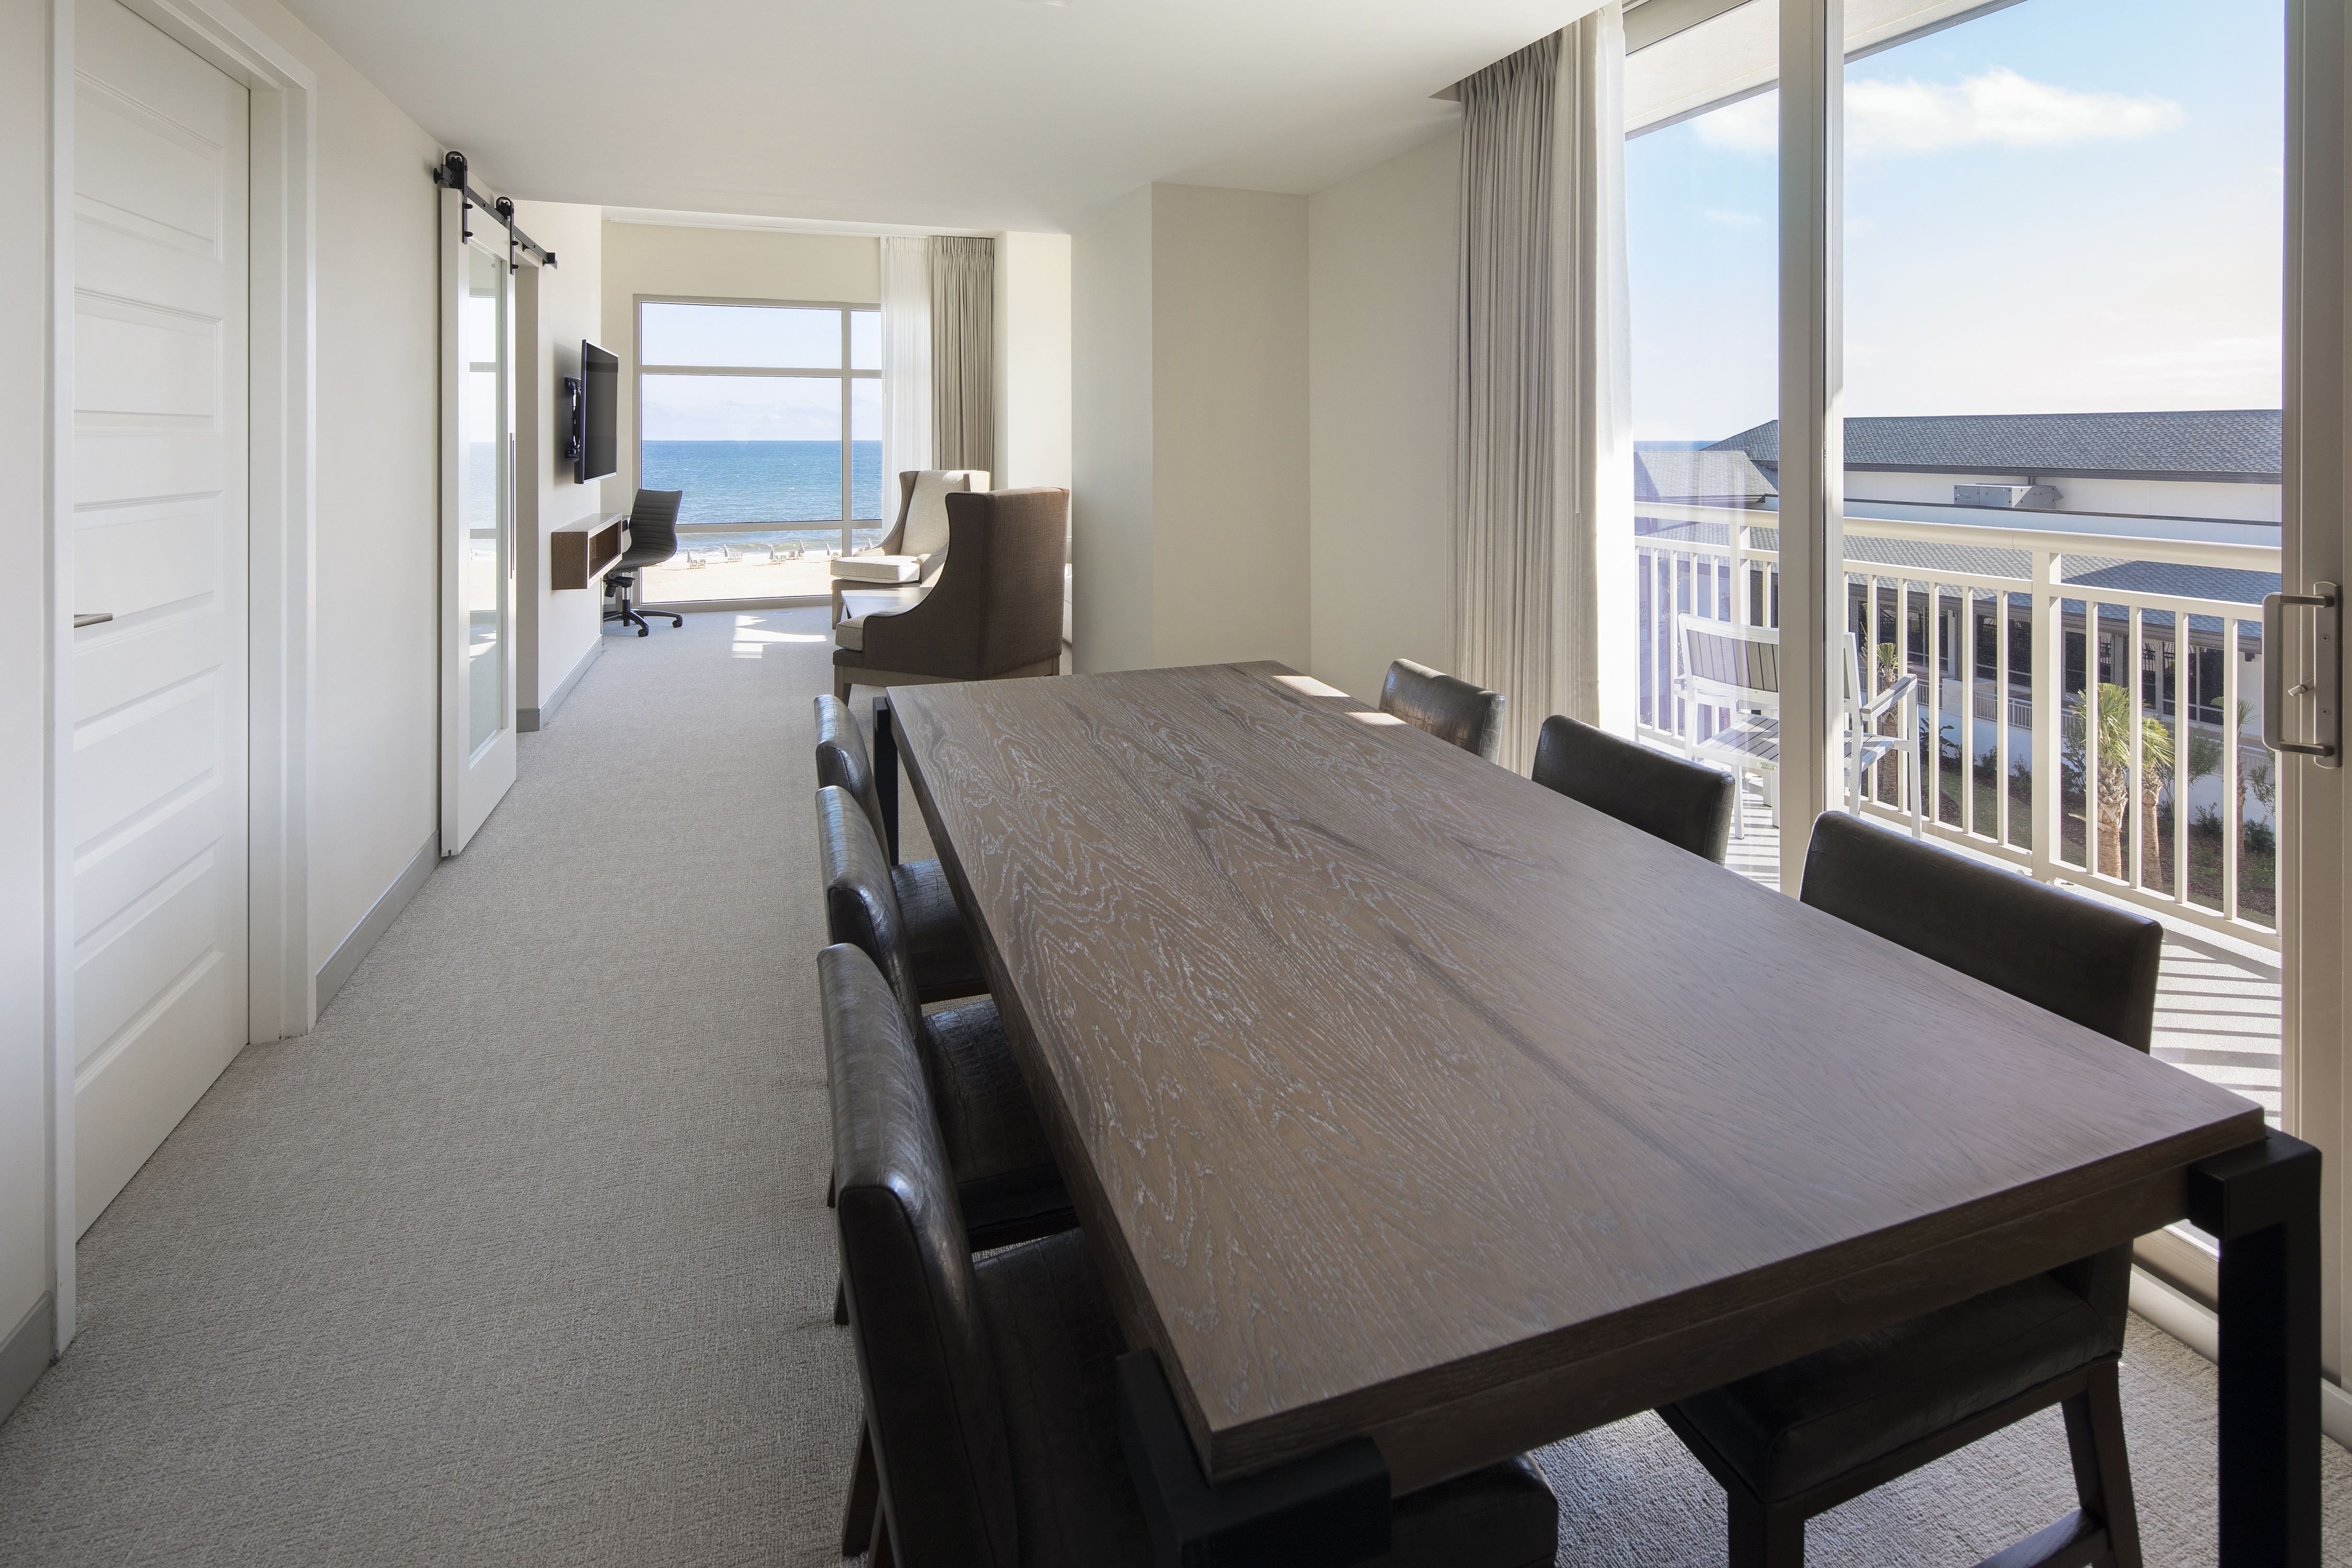 Corner Suite with Community Table, Lounge Area, Outside View, and Room Technology